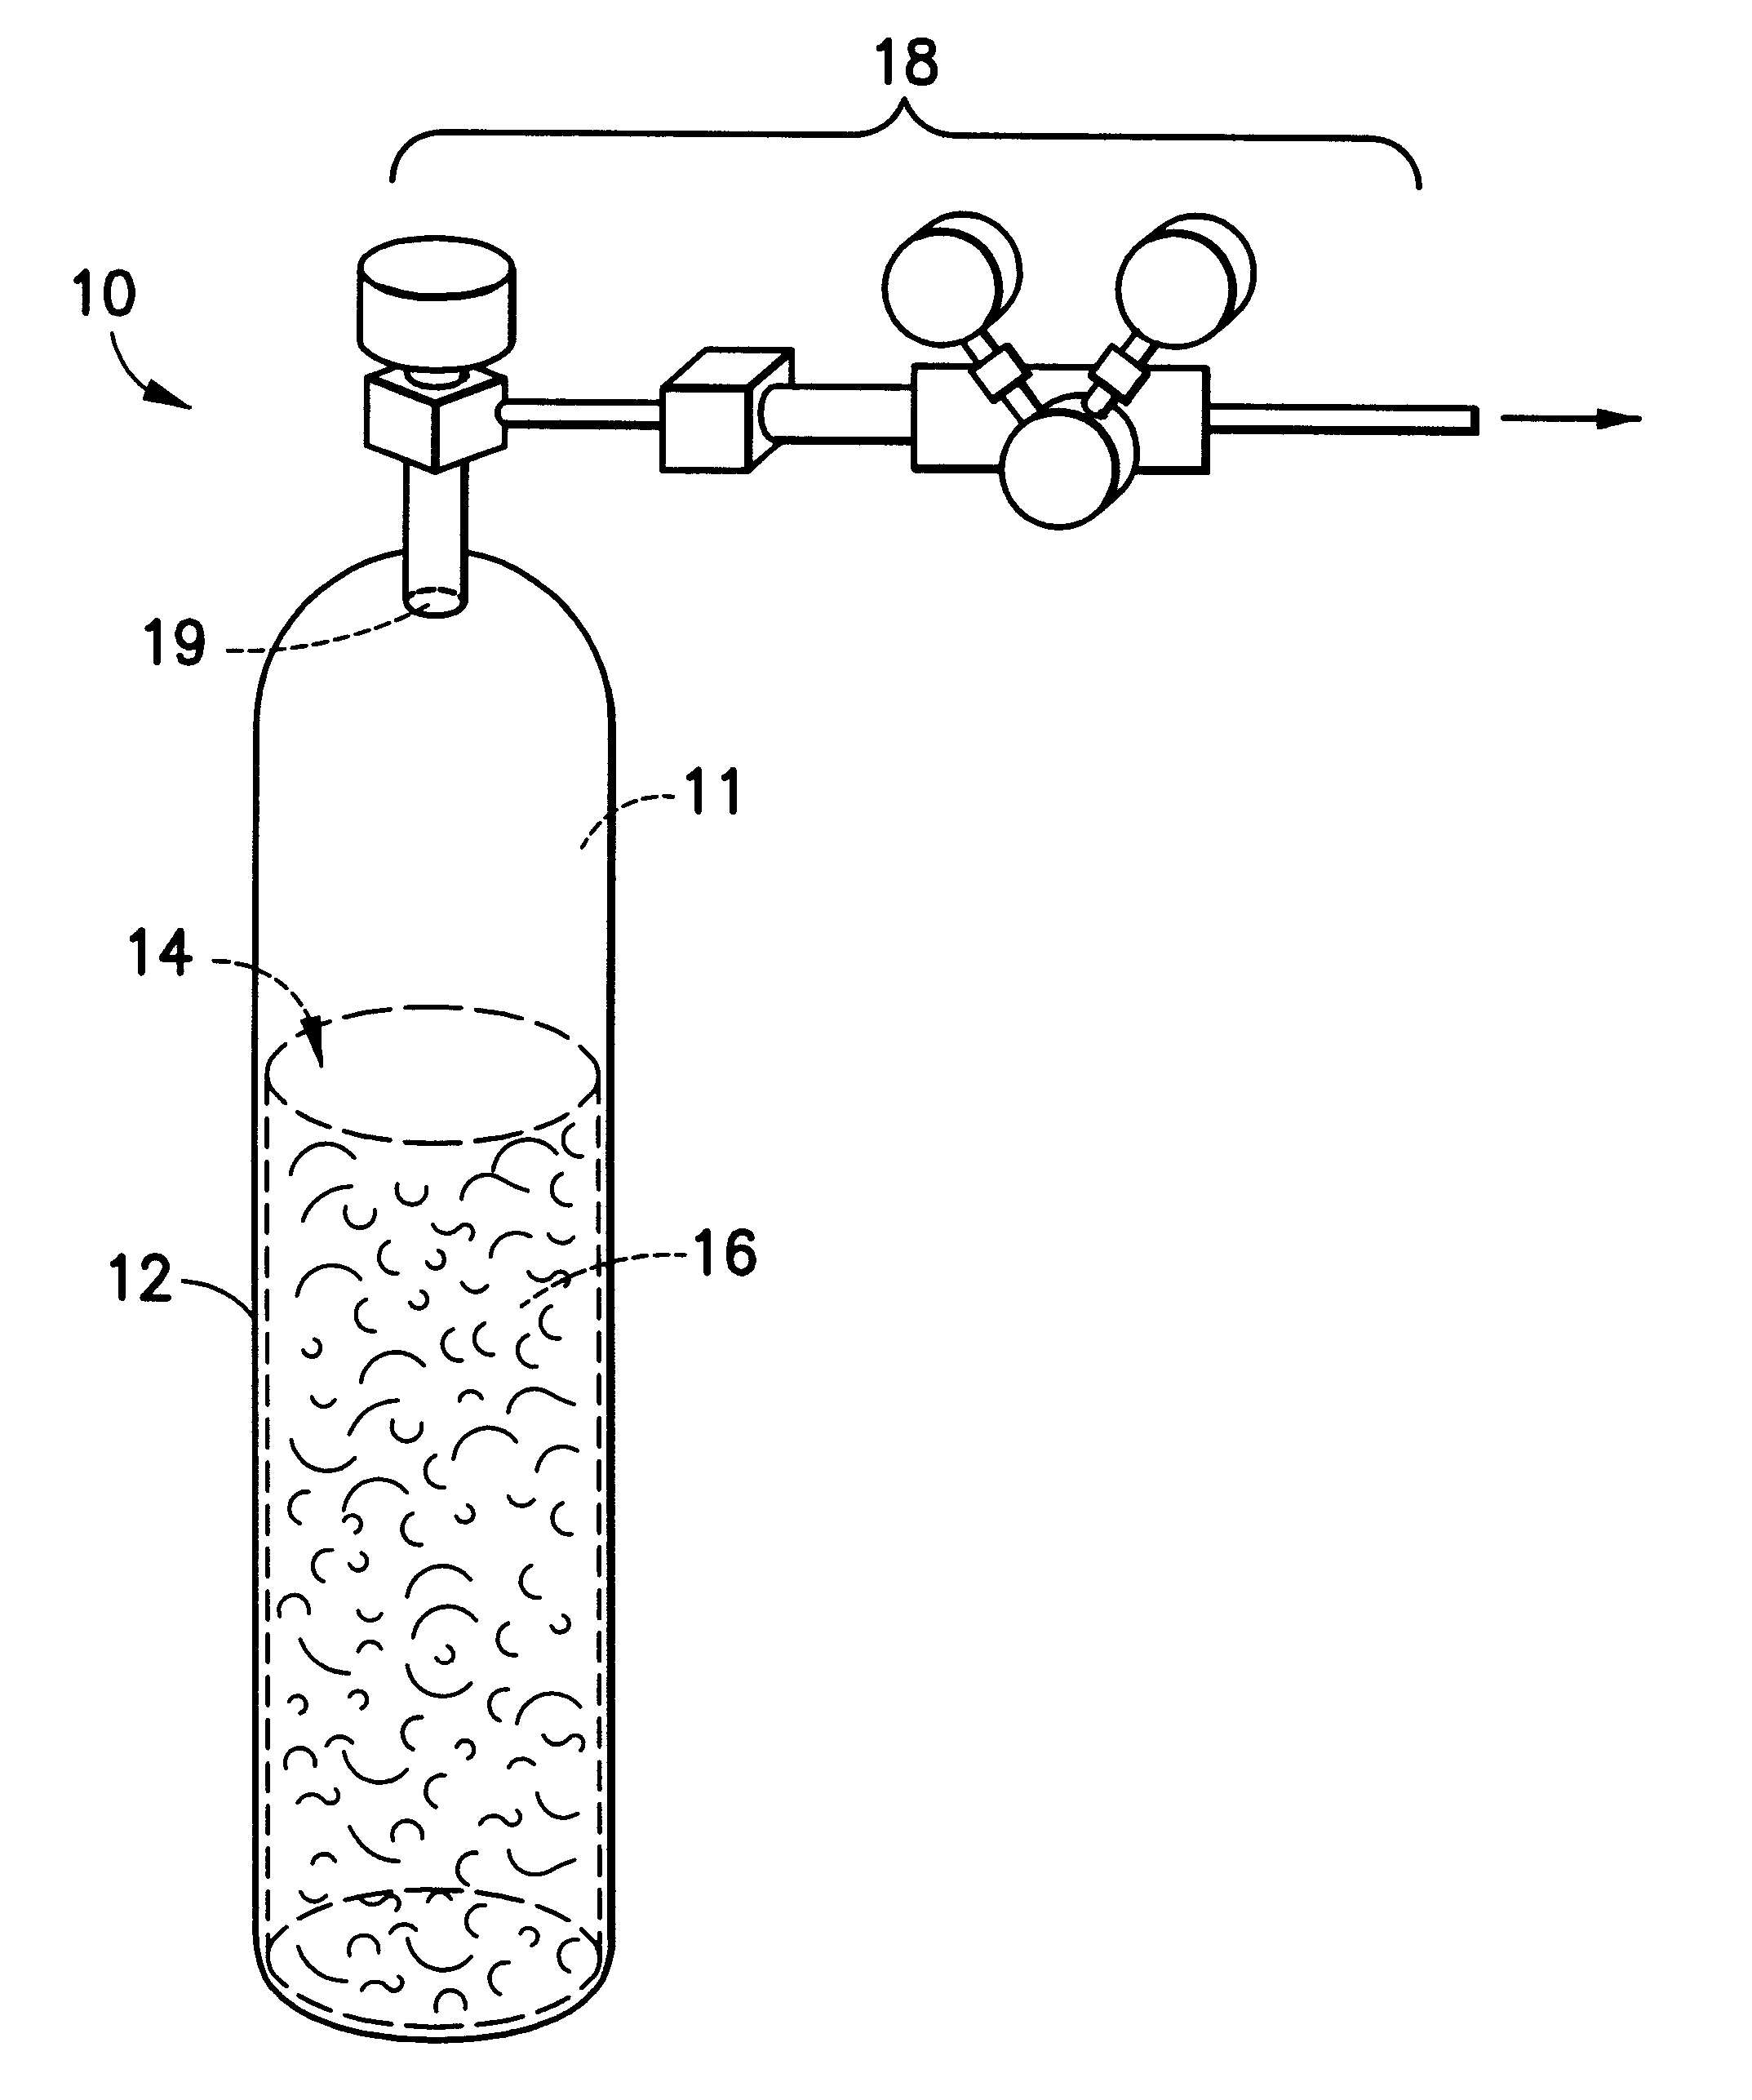 Apparatus and process for manufacturing semiconductor devices, products and precursor structures utilizing sorbent-based fluid storage and dispensing system for reagent delivery